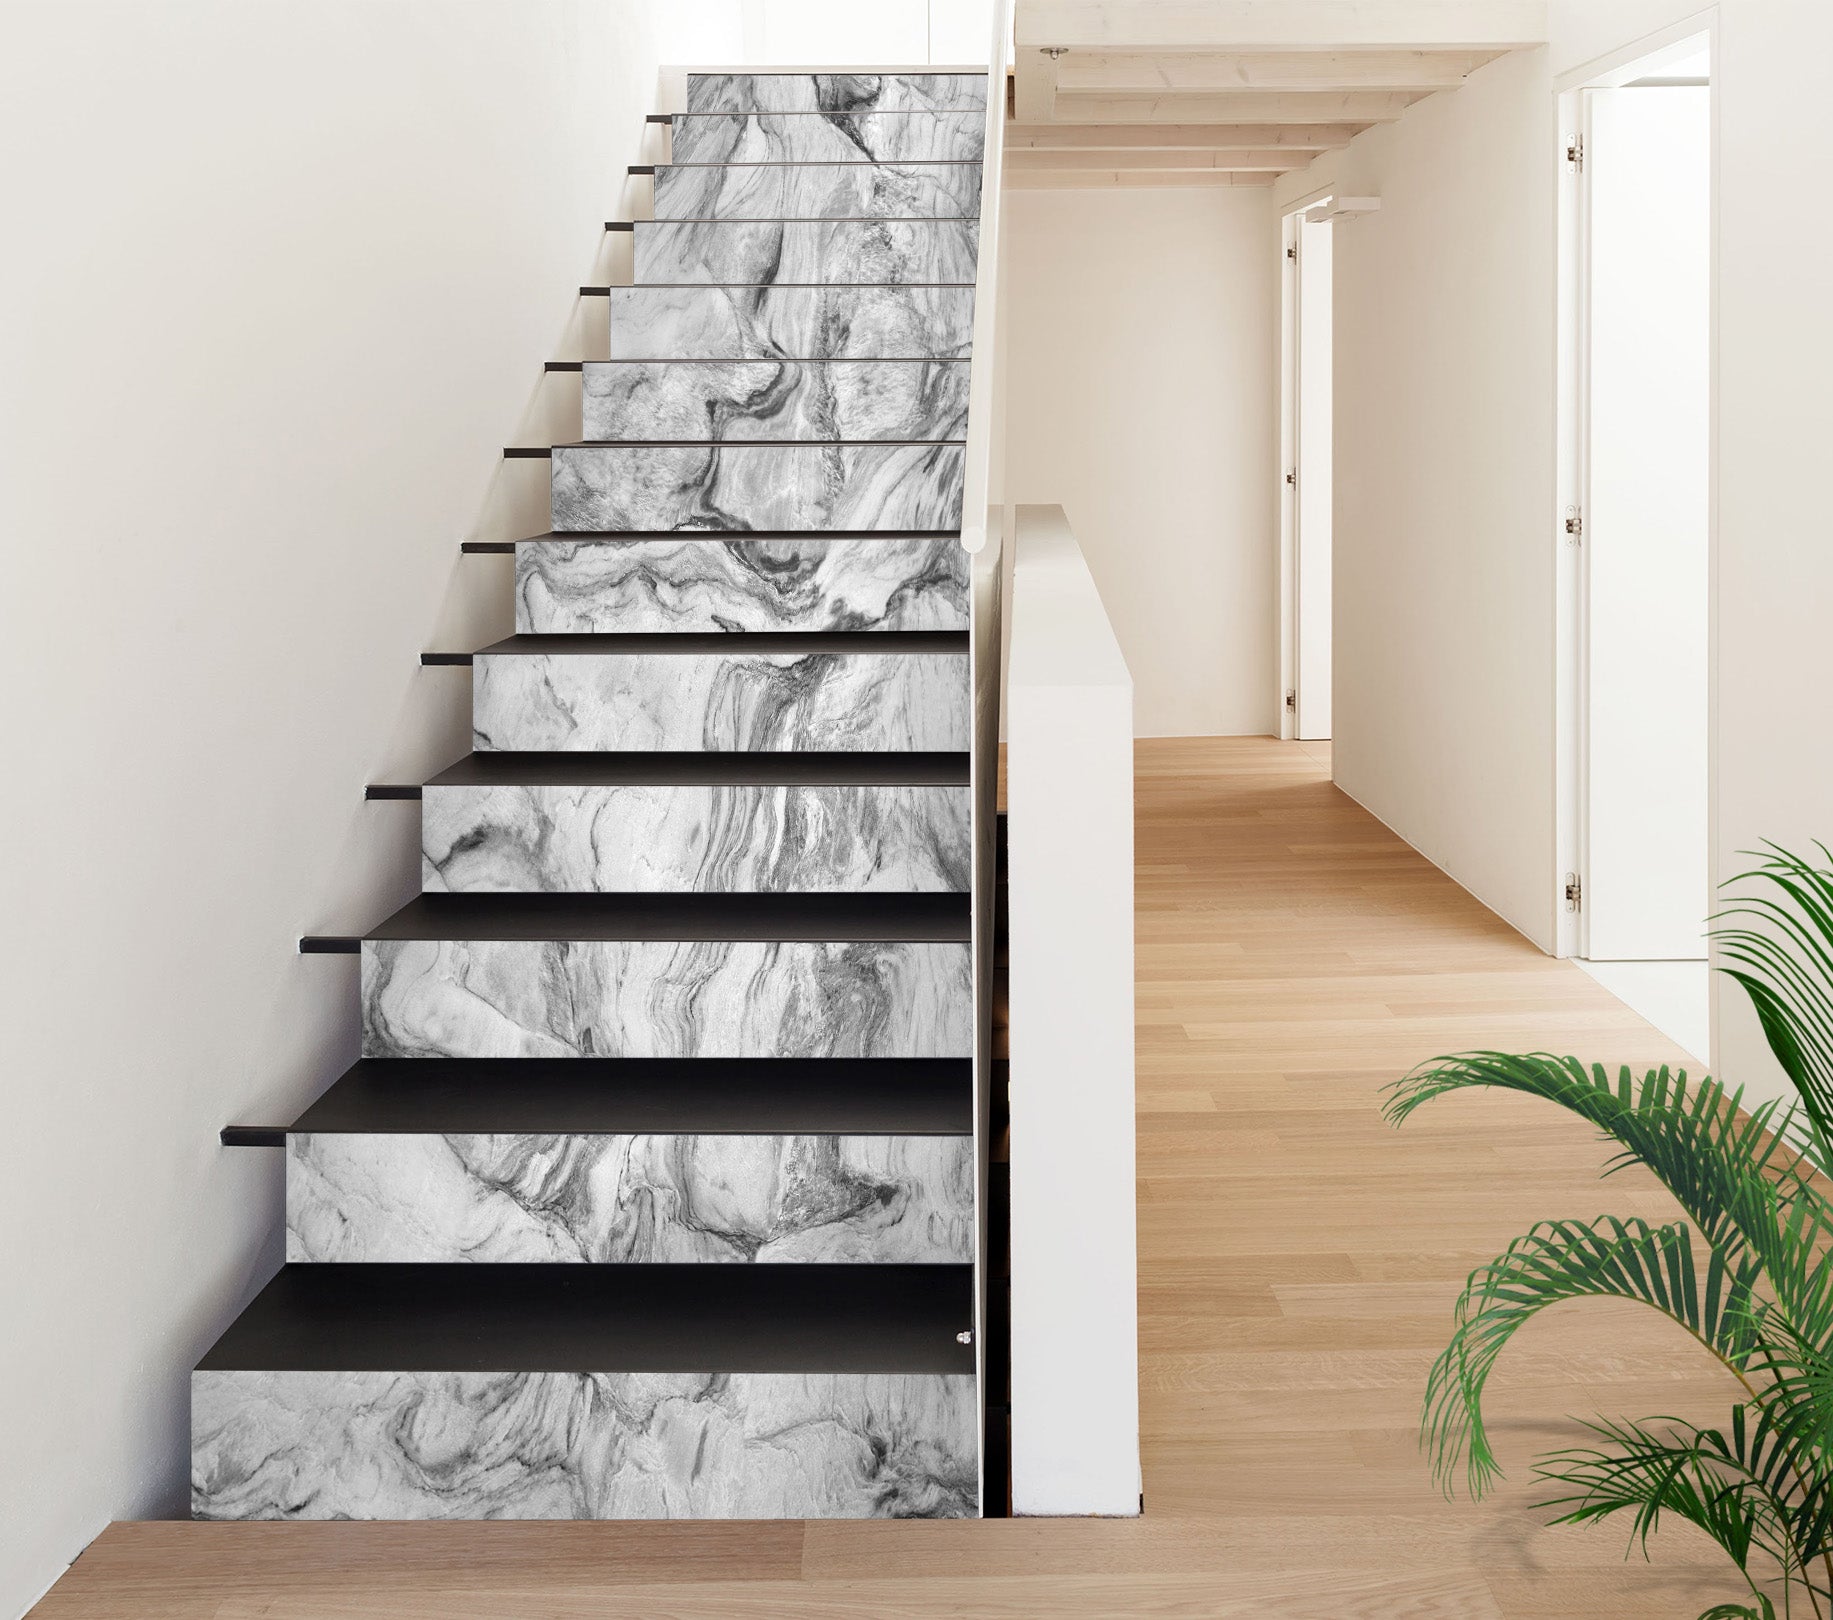 3D White Cluster 577 Stair Risers